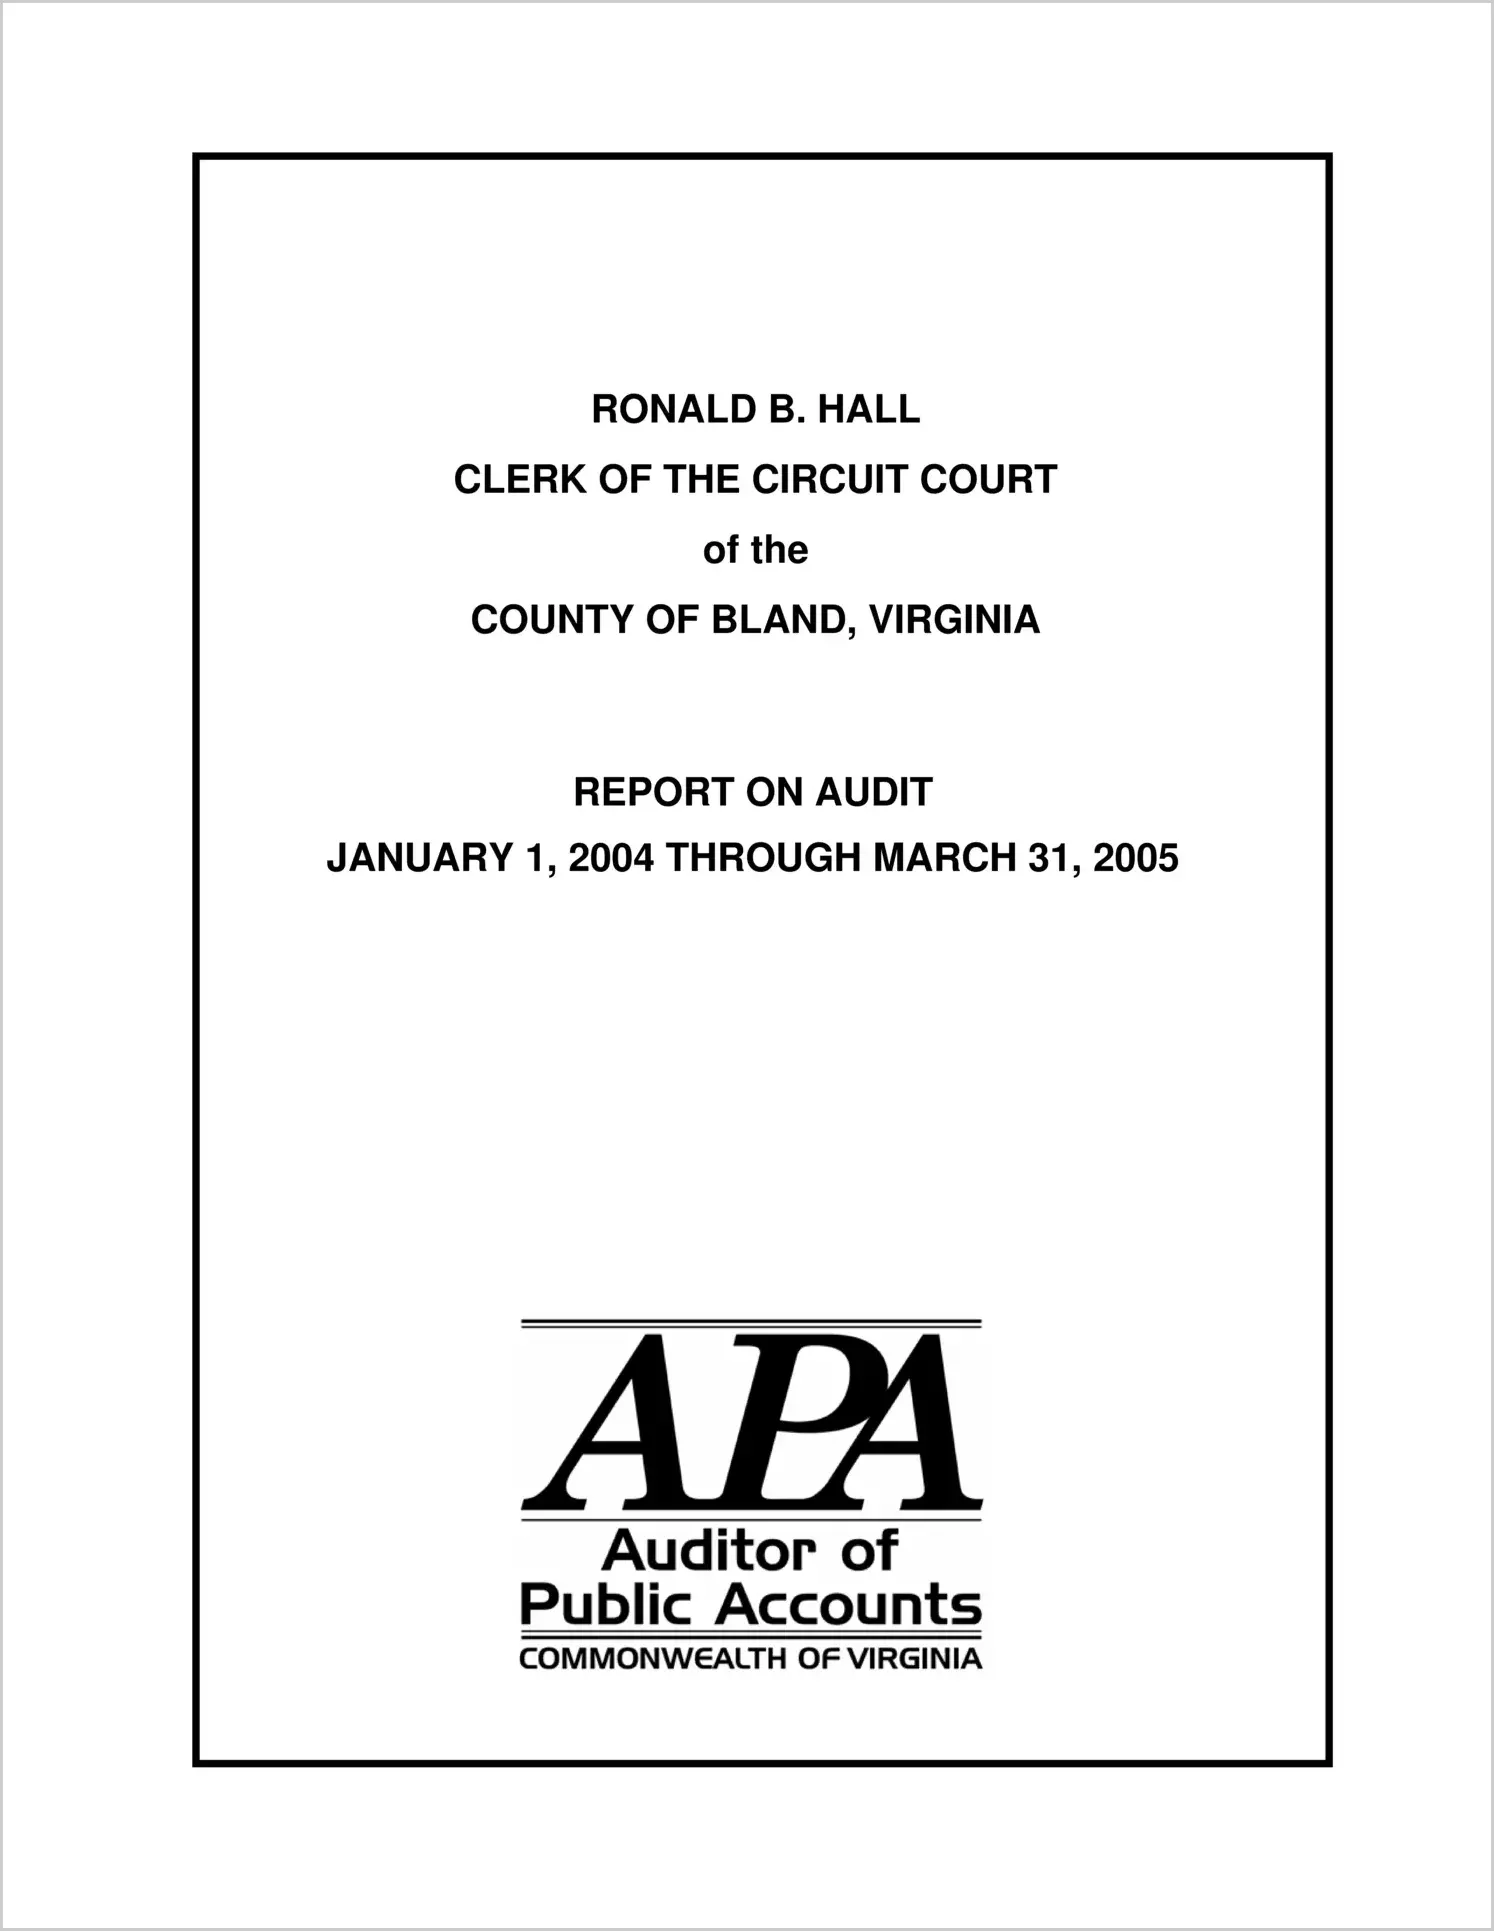 Clerk of the Circuit Court of the County of Bland for the period January 1, 2004 through March 31, 2005